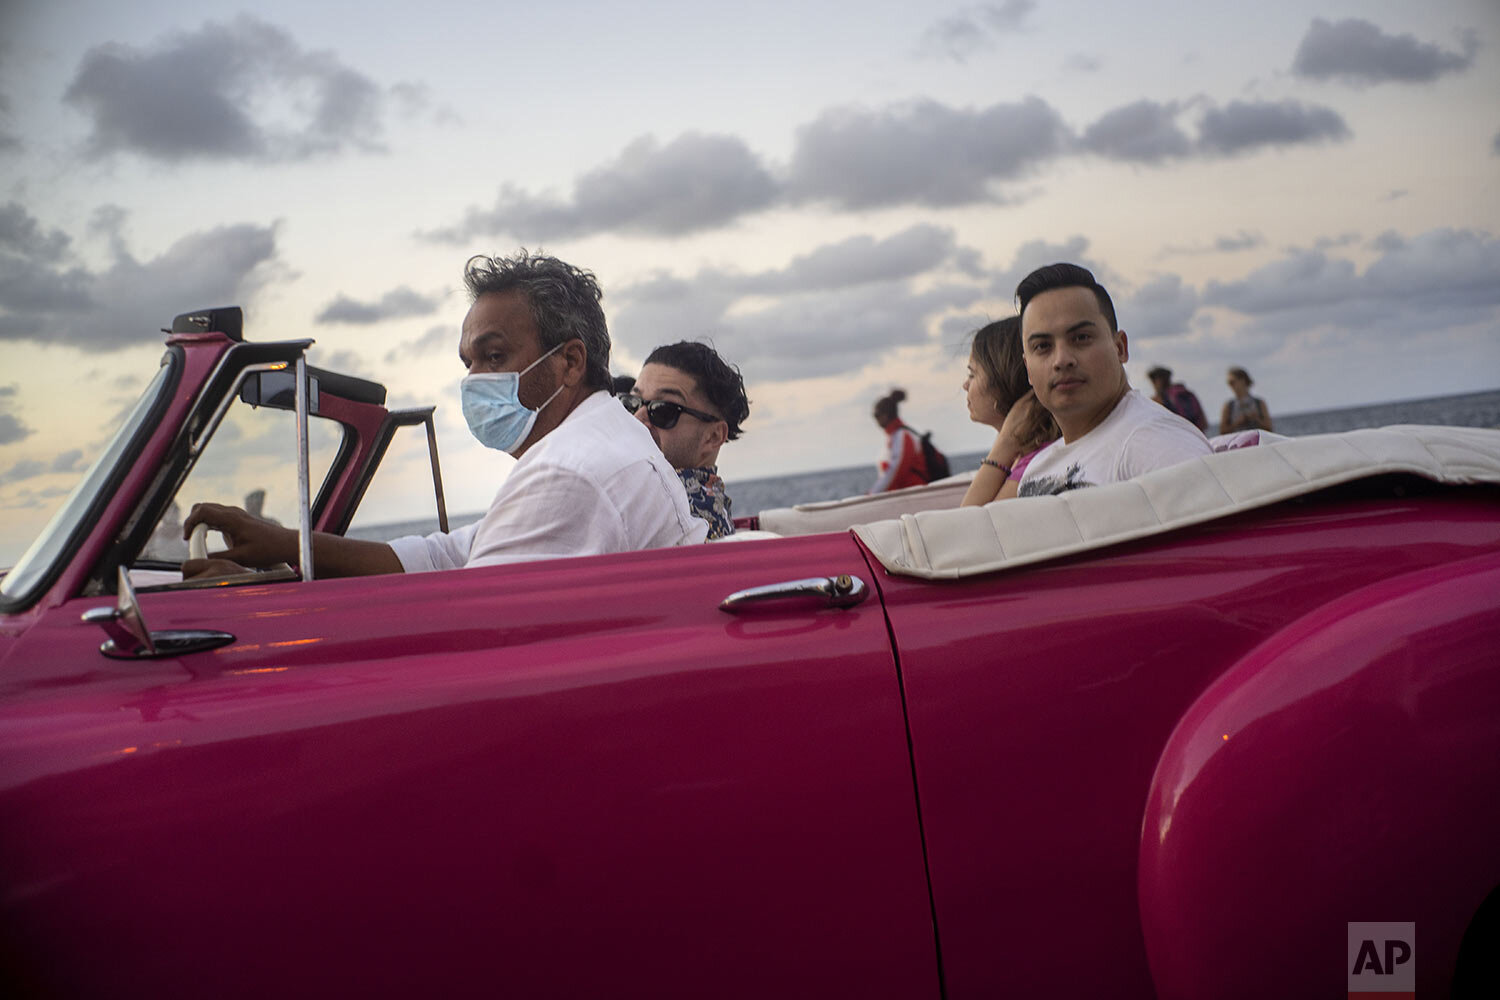  A taxi driver, wearing a protective mask as a precaution against the spread of the new coronavirus, drives his American classic car with tourists in Havana, Cuba, March 13, 2020. (AP Photo / Ramon Espinosa) 